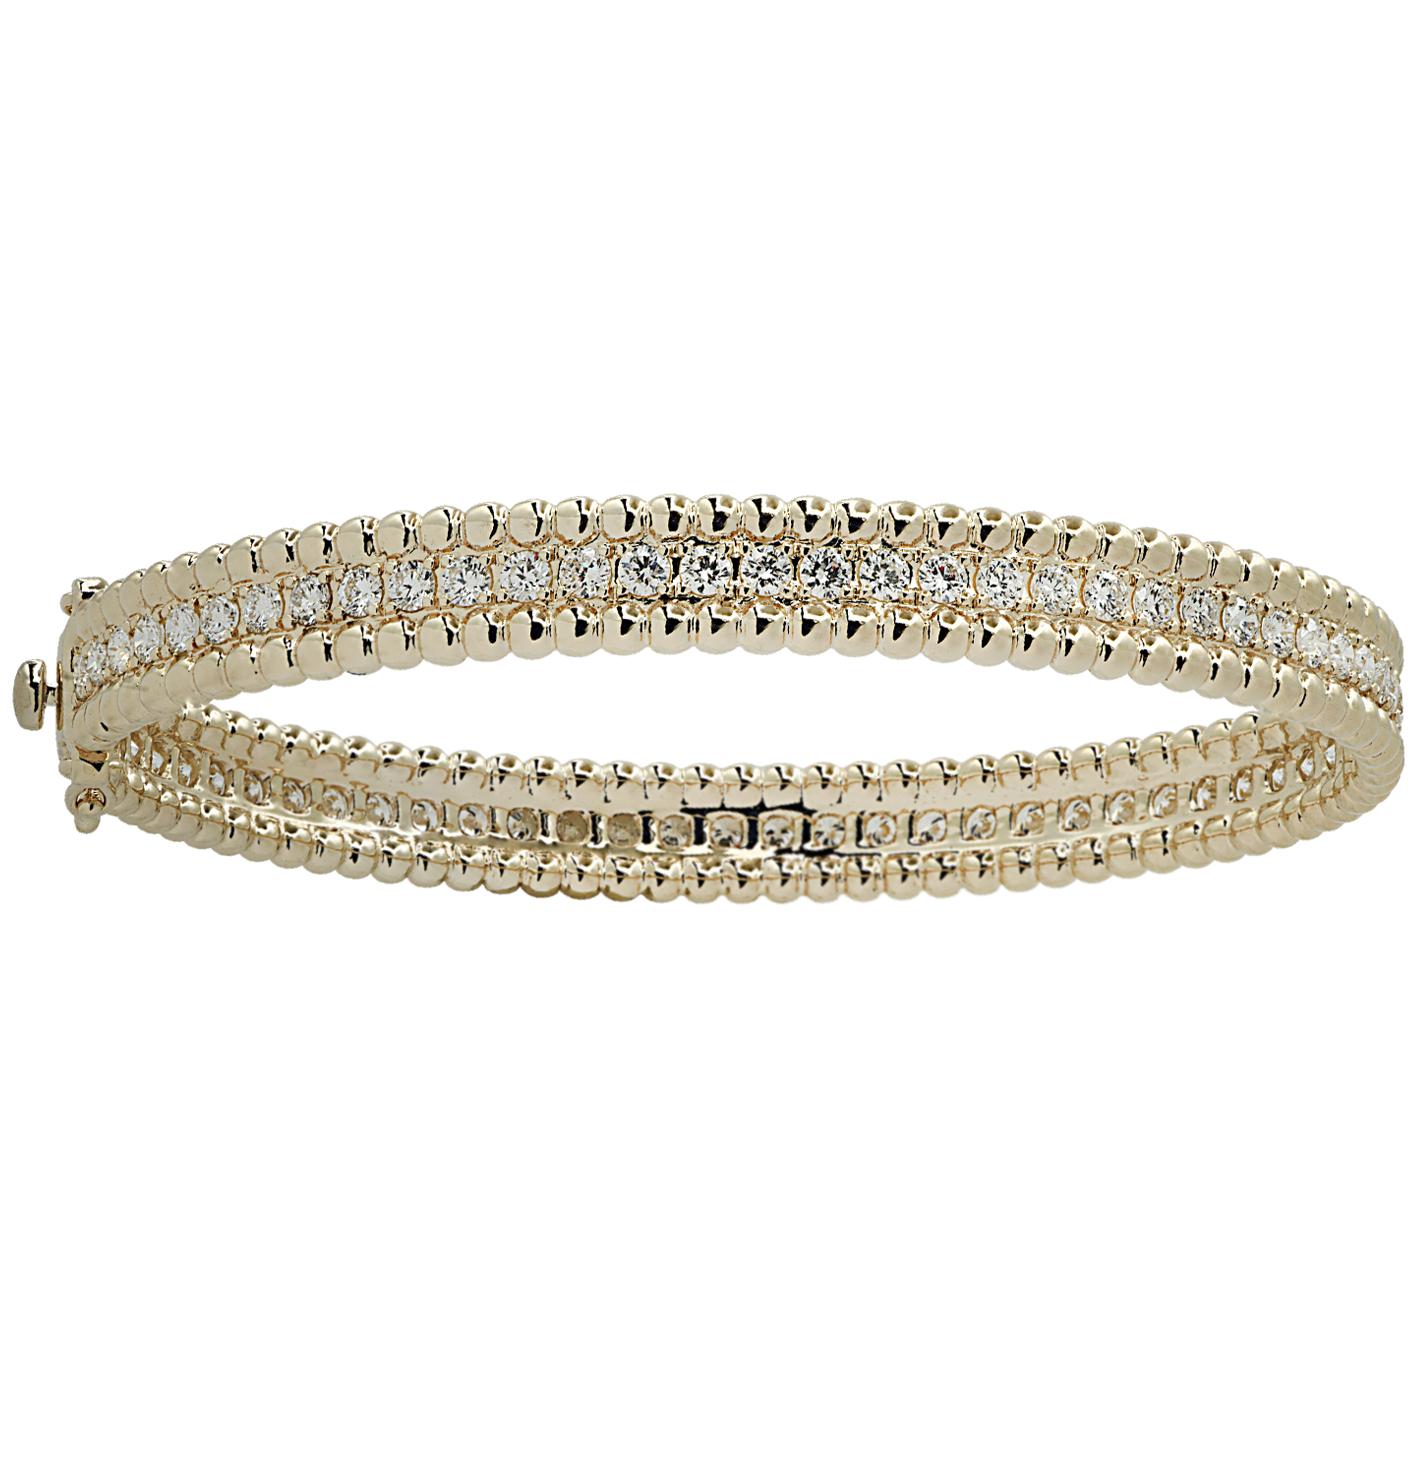 Stunning Vivid Diamonds Bangle Bracelet crafted in yellow gold, featuring 64 round brilliant cut diamonds weighing 2.75 carats total, F color, VS-SI clarity. This spectacular bangle is set with a row of diamonds, laced with gold beads creating a